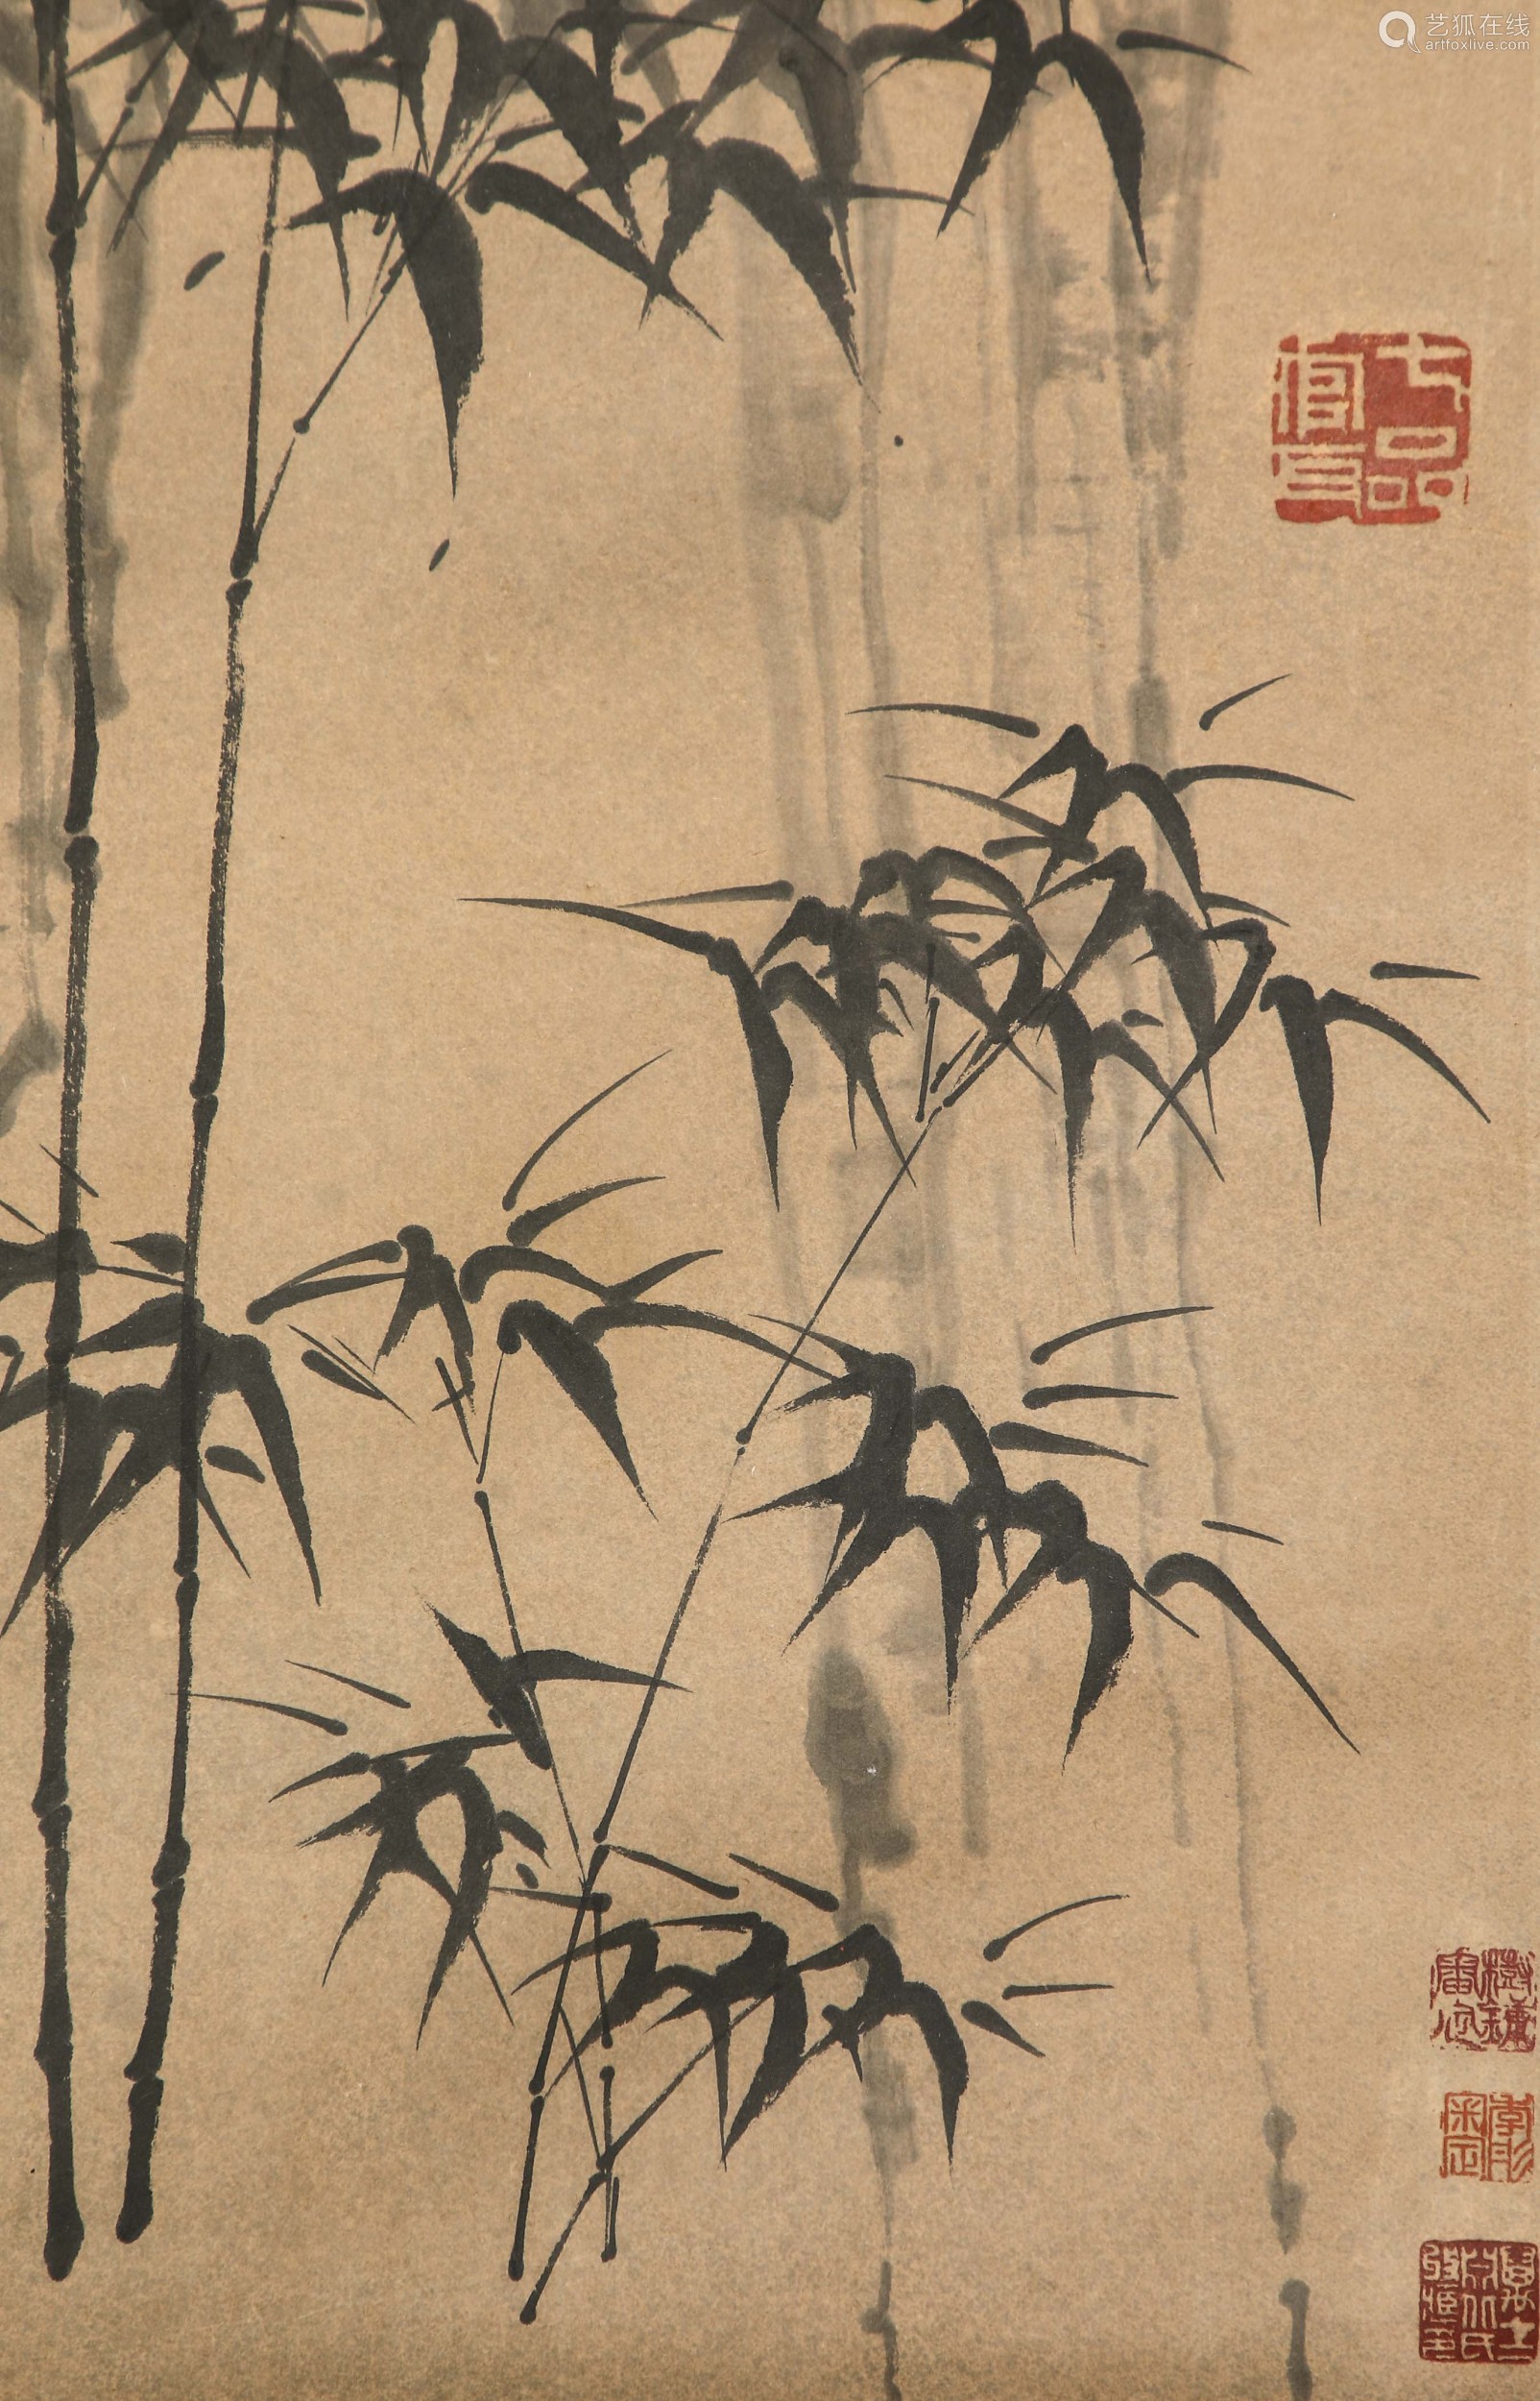 Chinese ink painting,
Zheng Banqiao's Ink Bamboo Drawings